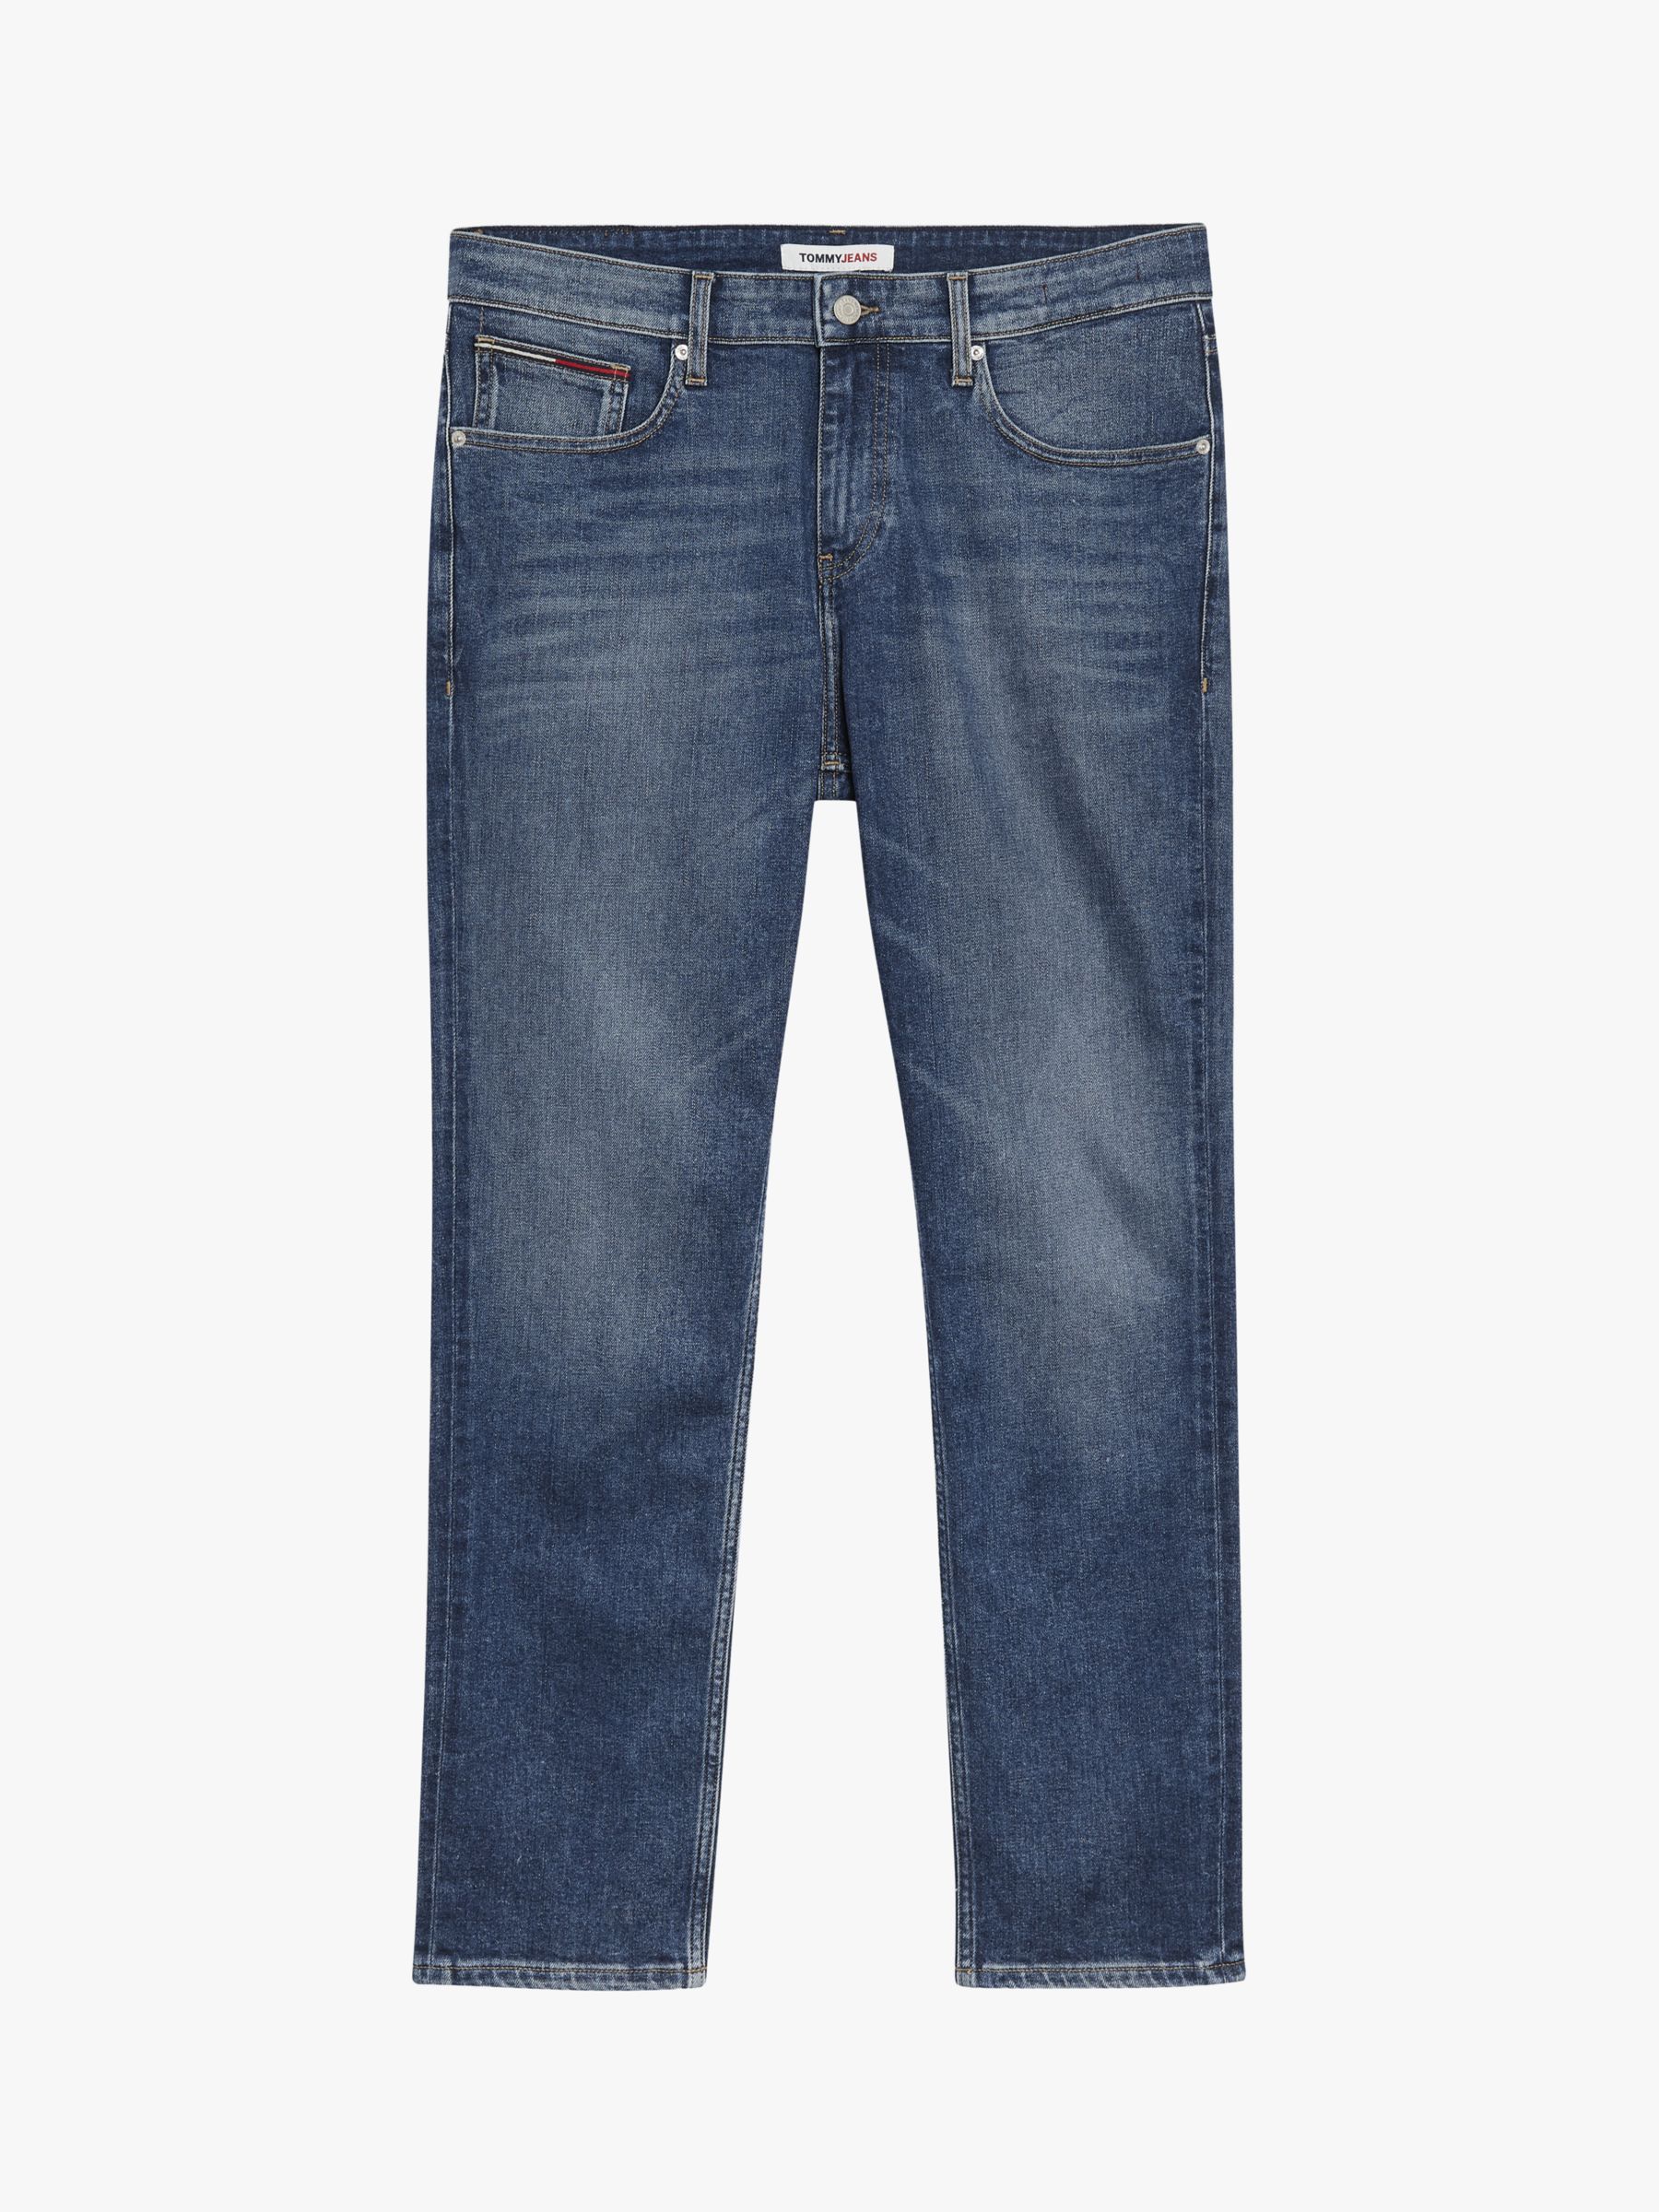 Tommy Jeans Original Ryan Straight Jeans, Dale DB